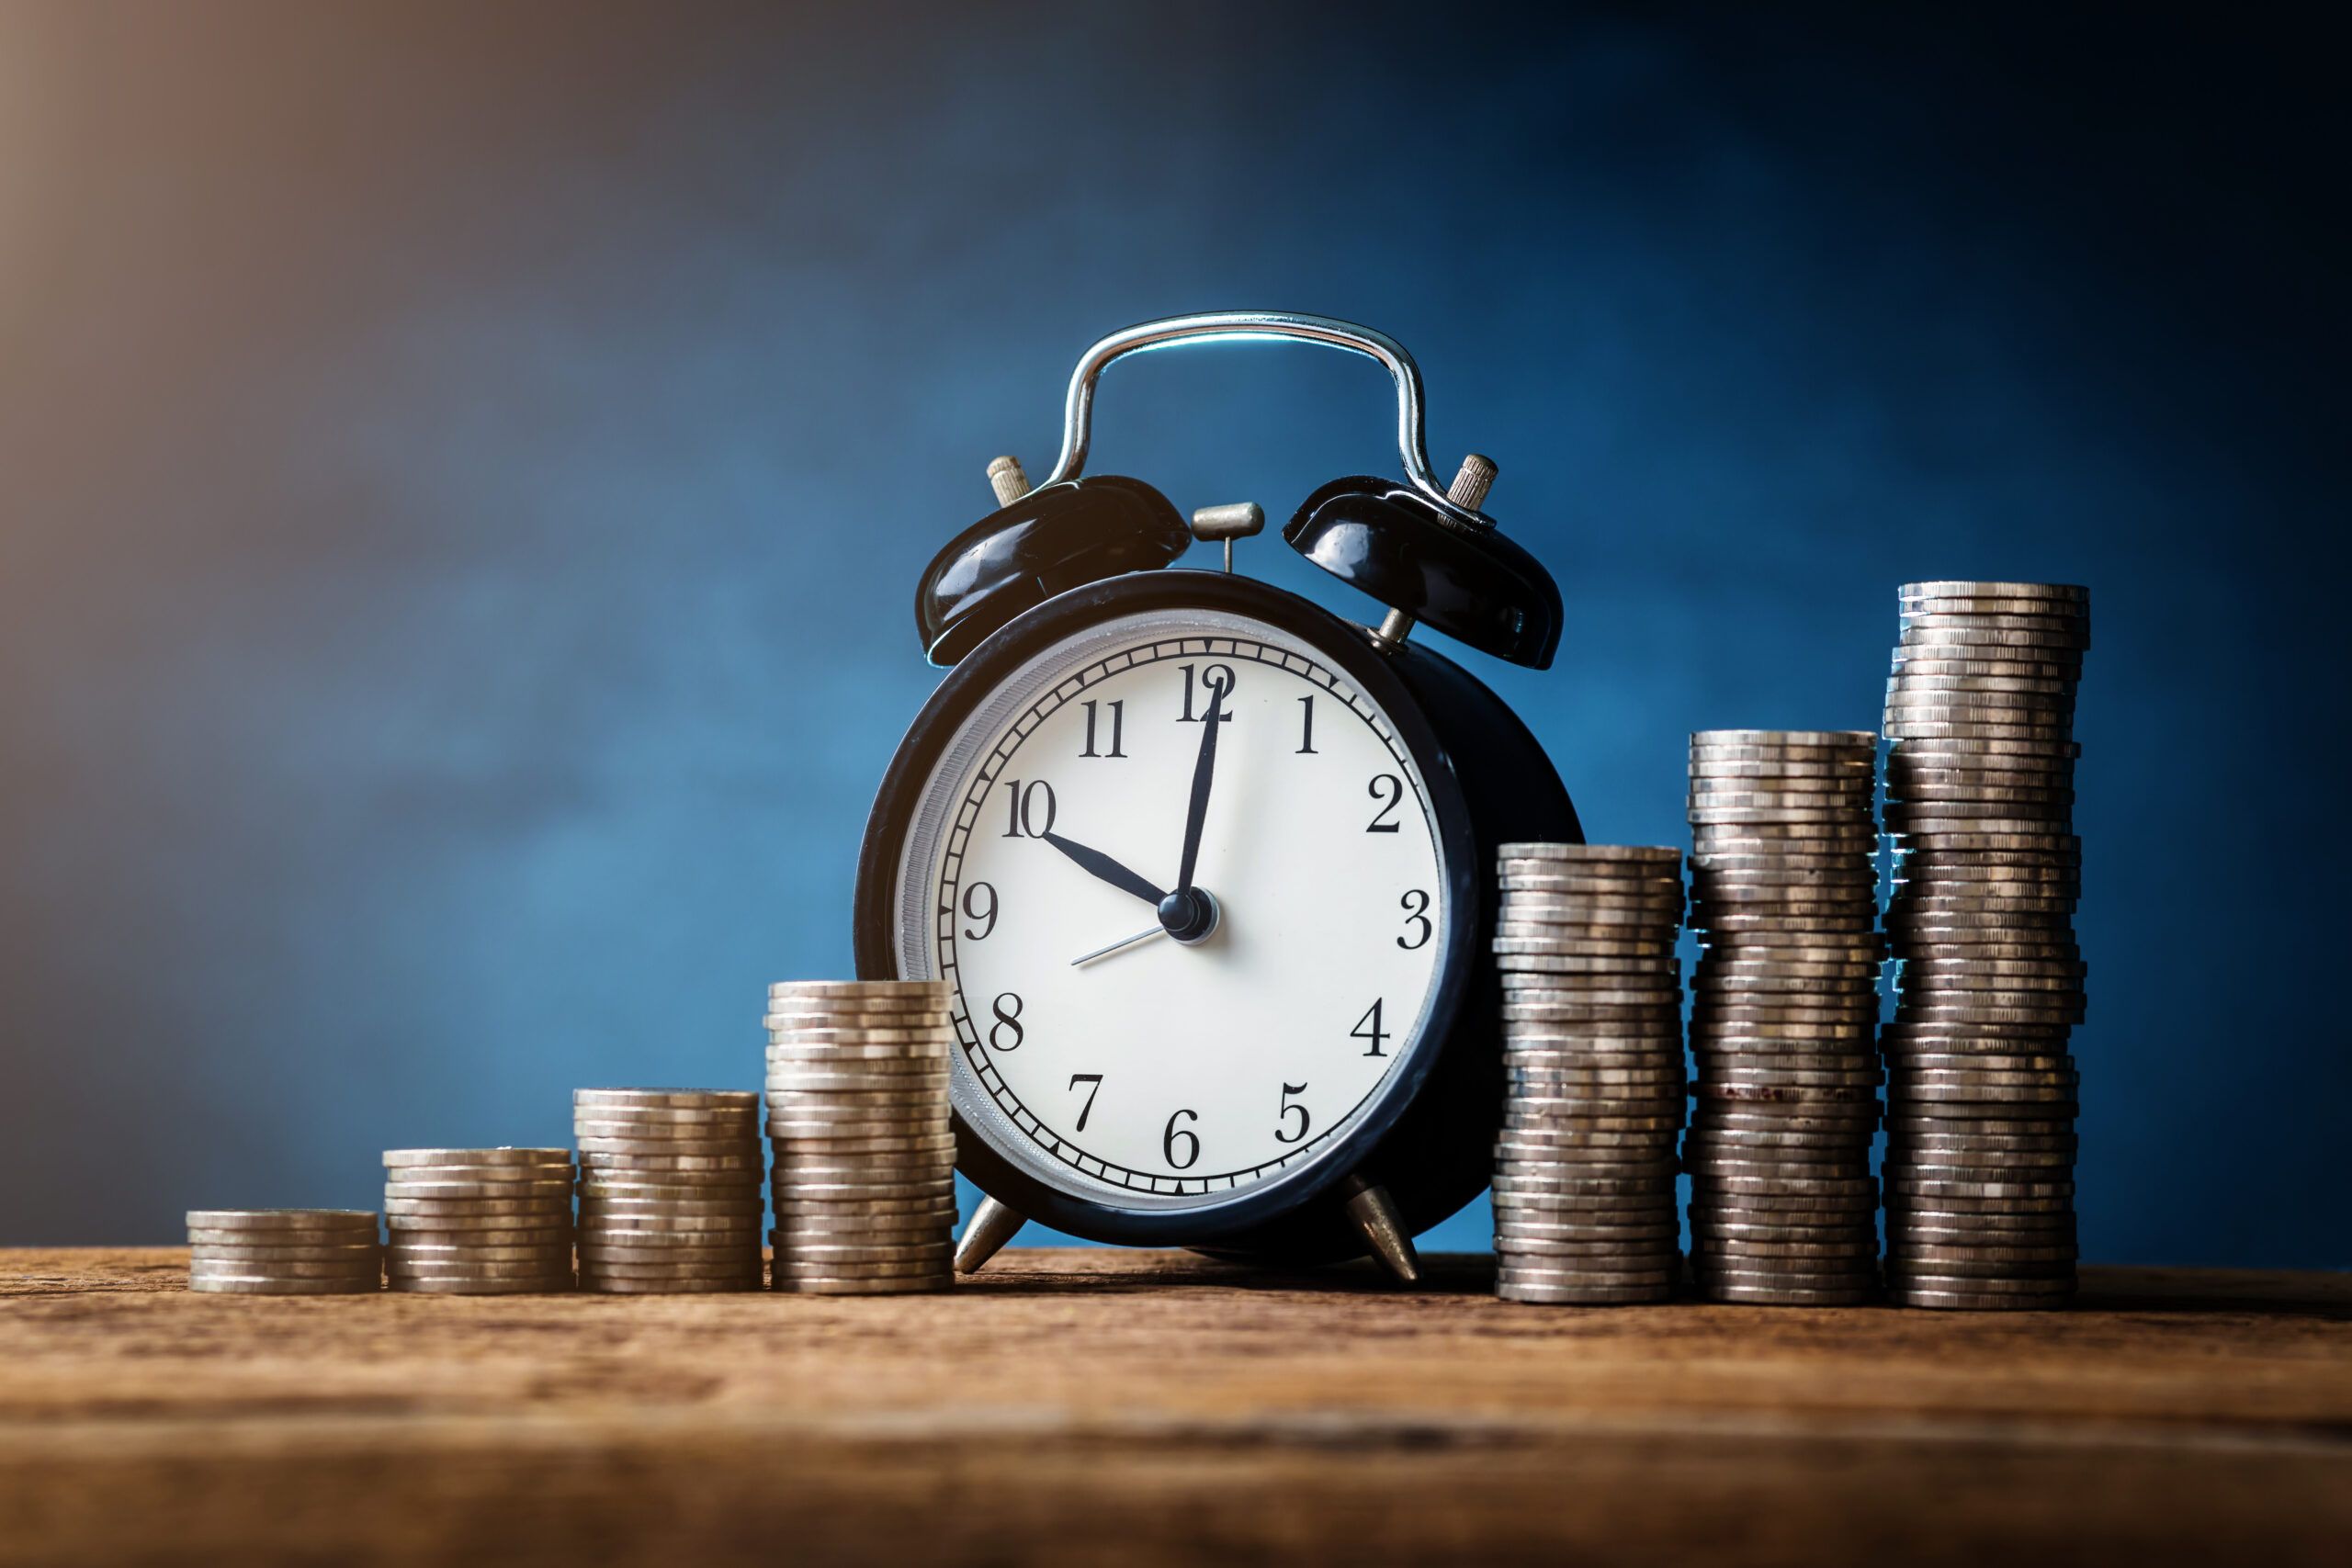 A stock photograph showing an alarm clock amidst a pile of money, which has been arranged in ascending increments.